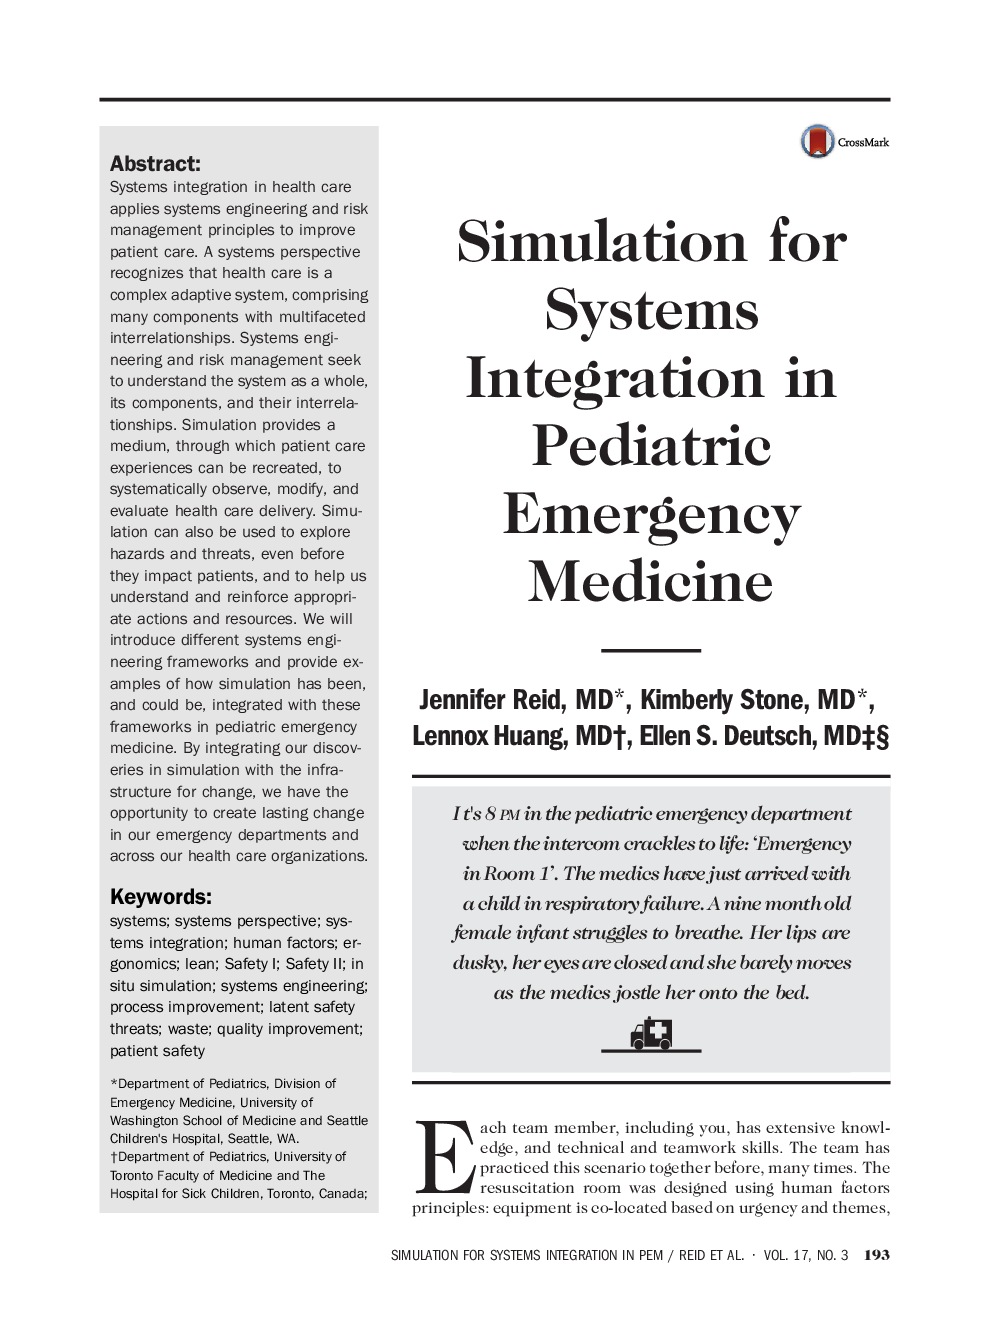 Simulation for Systems Integration in Pediatric Emergency Medicine